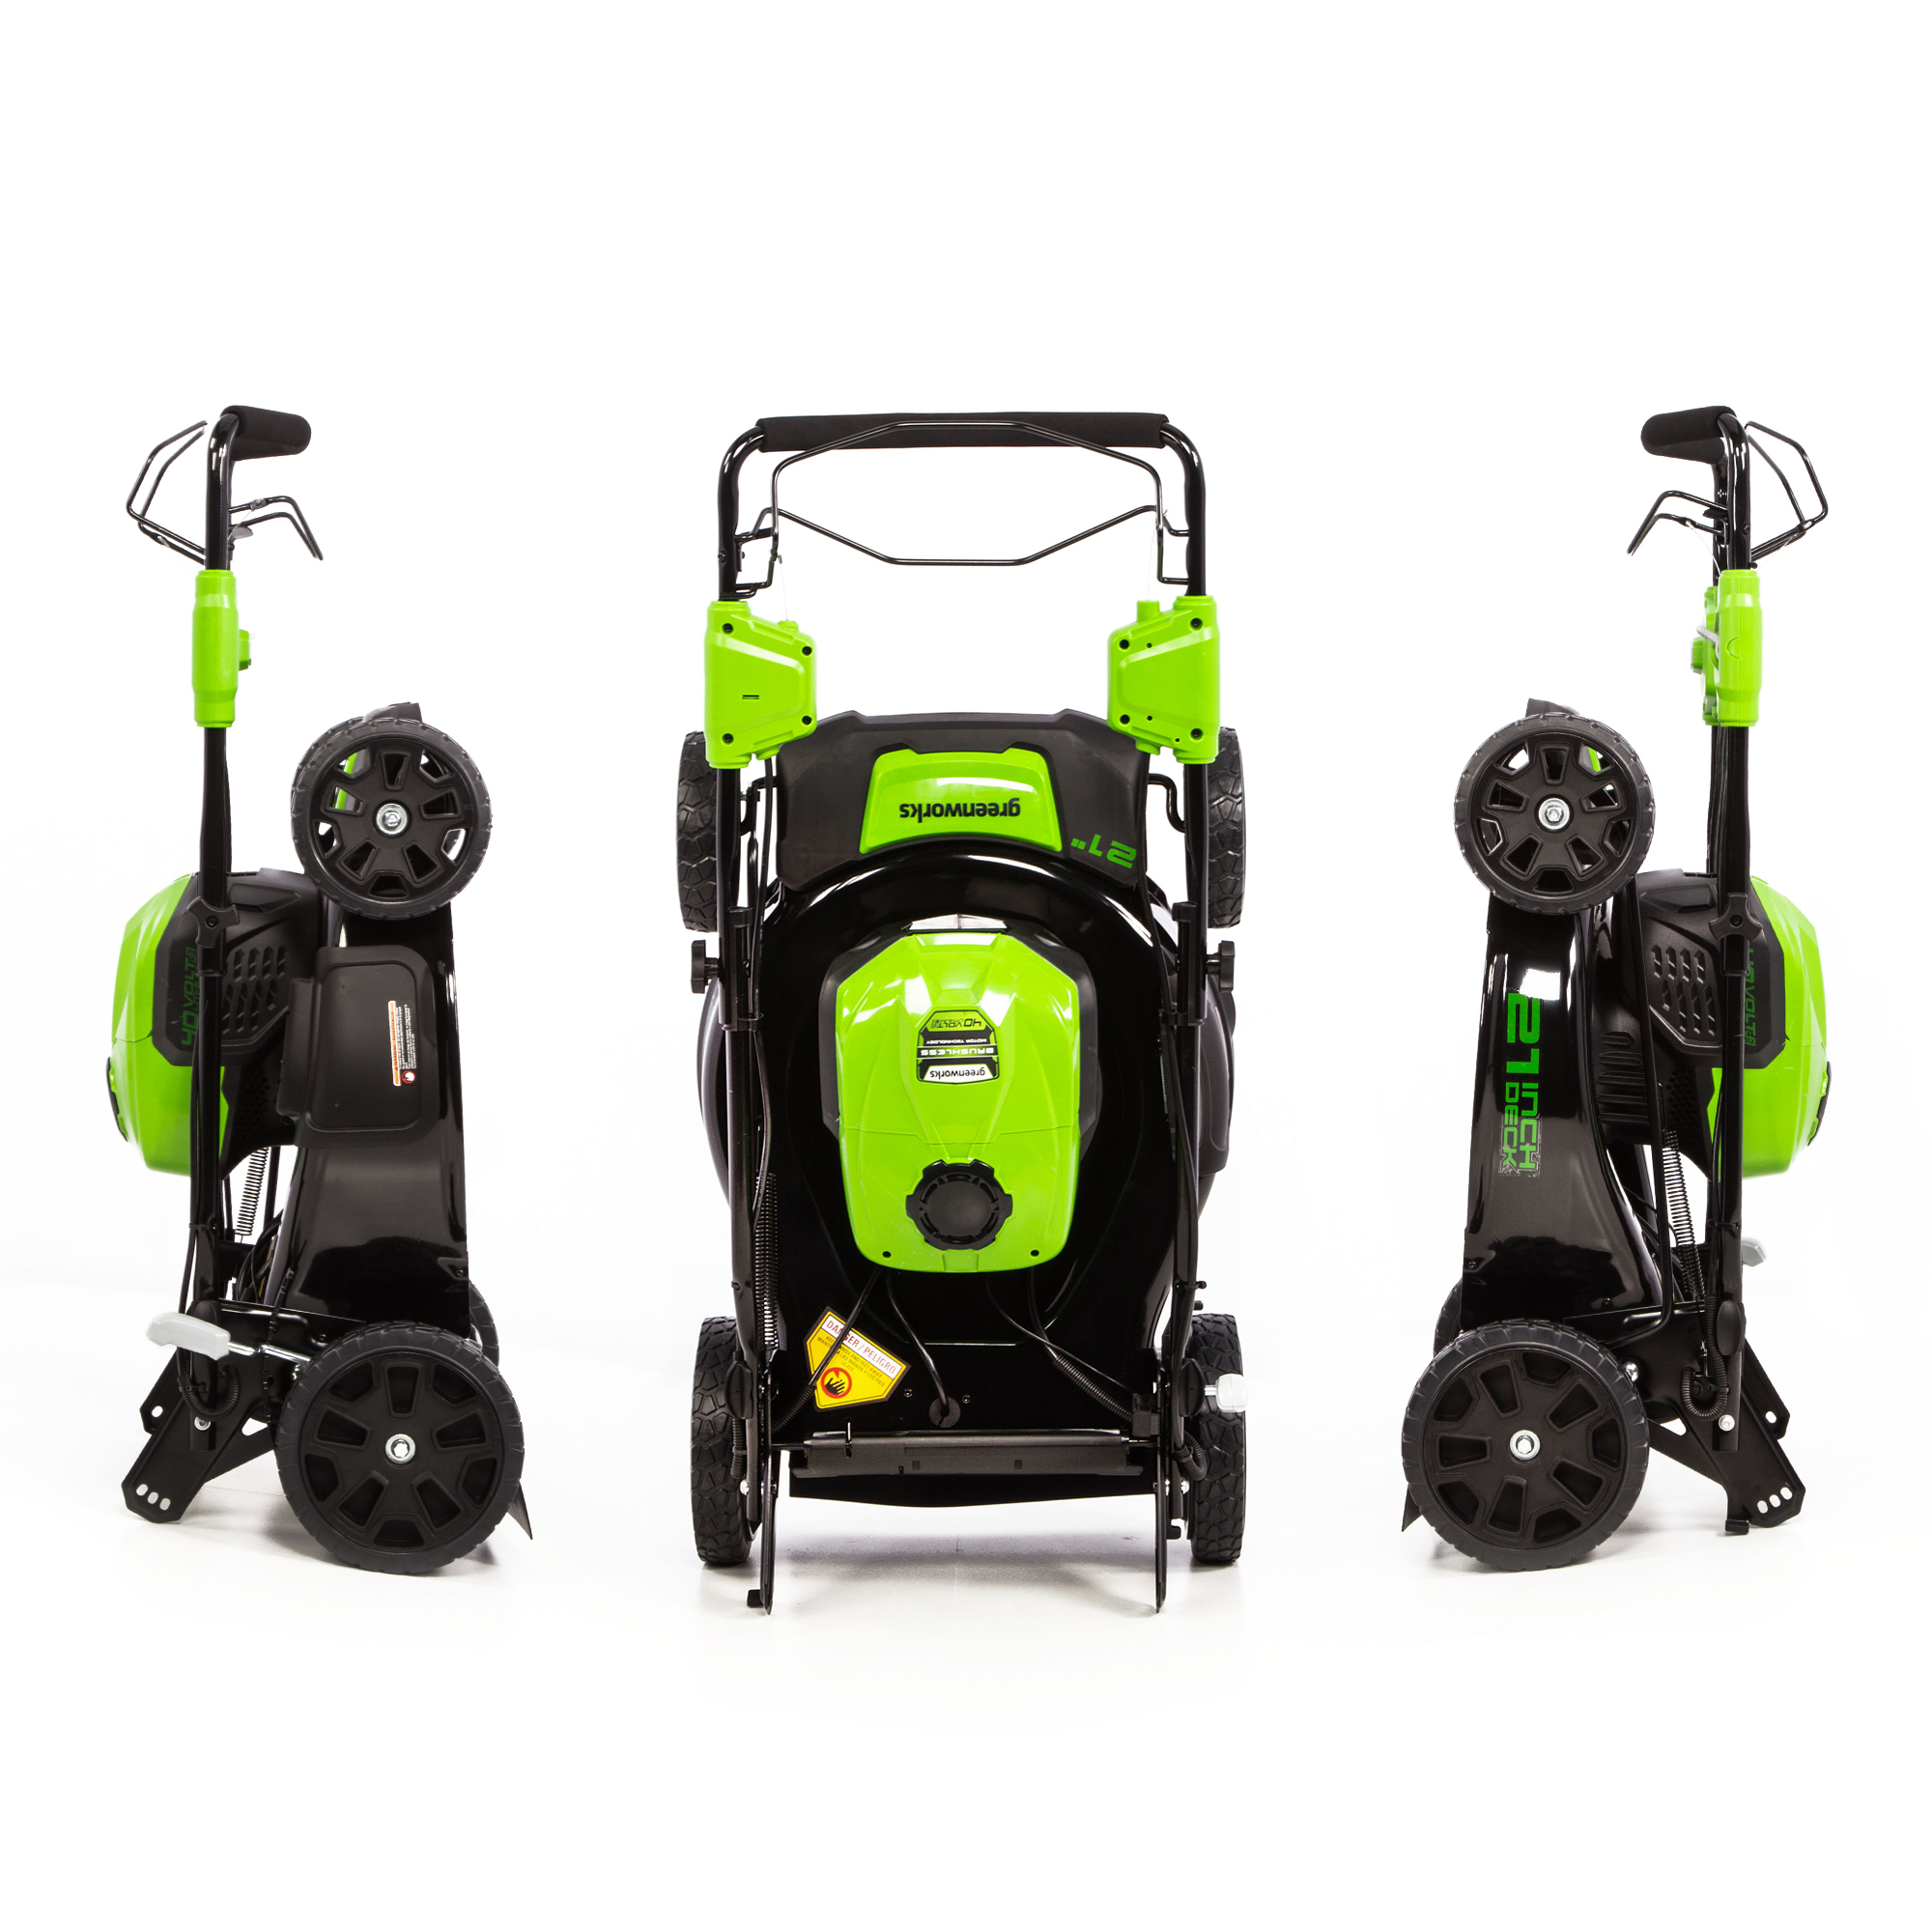 Greenworks 21" 40V Self-Propelled Lawn Mower with 5.0 Ah Battery & Charger​ 2516402 - image 4 of 16